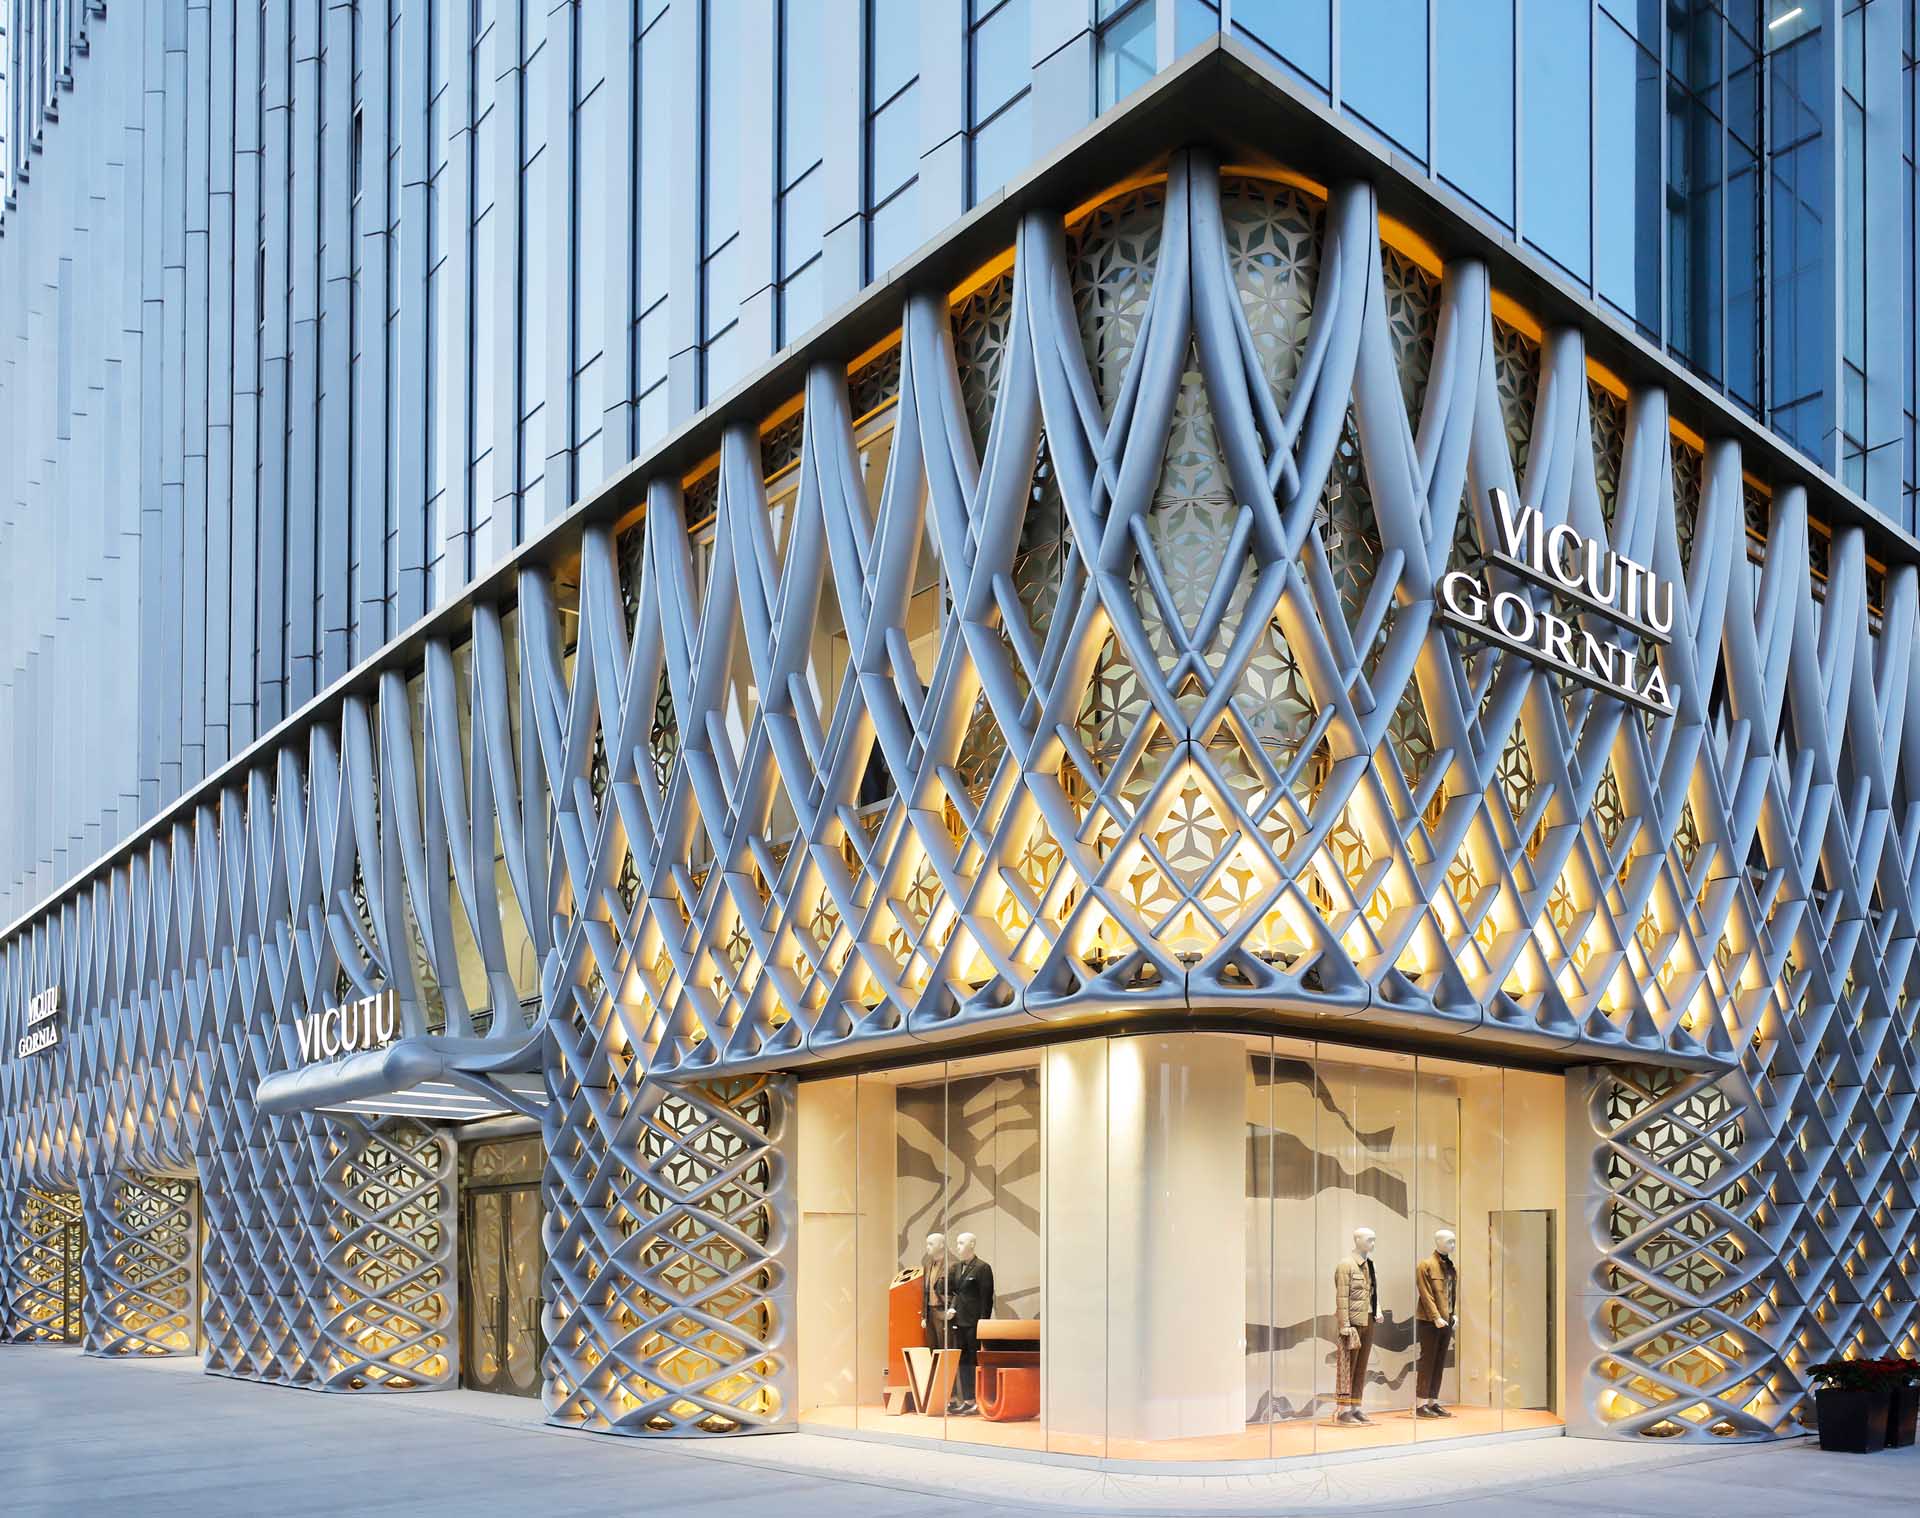 Similar to the nature of tailoring flat fabrics into three-dimensional garments, the construction of the facade comes from an innovative fabrication process of bending and flexing aluminum sheets into doubly curved geometries.